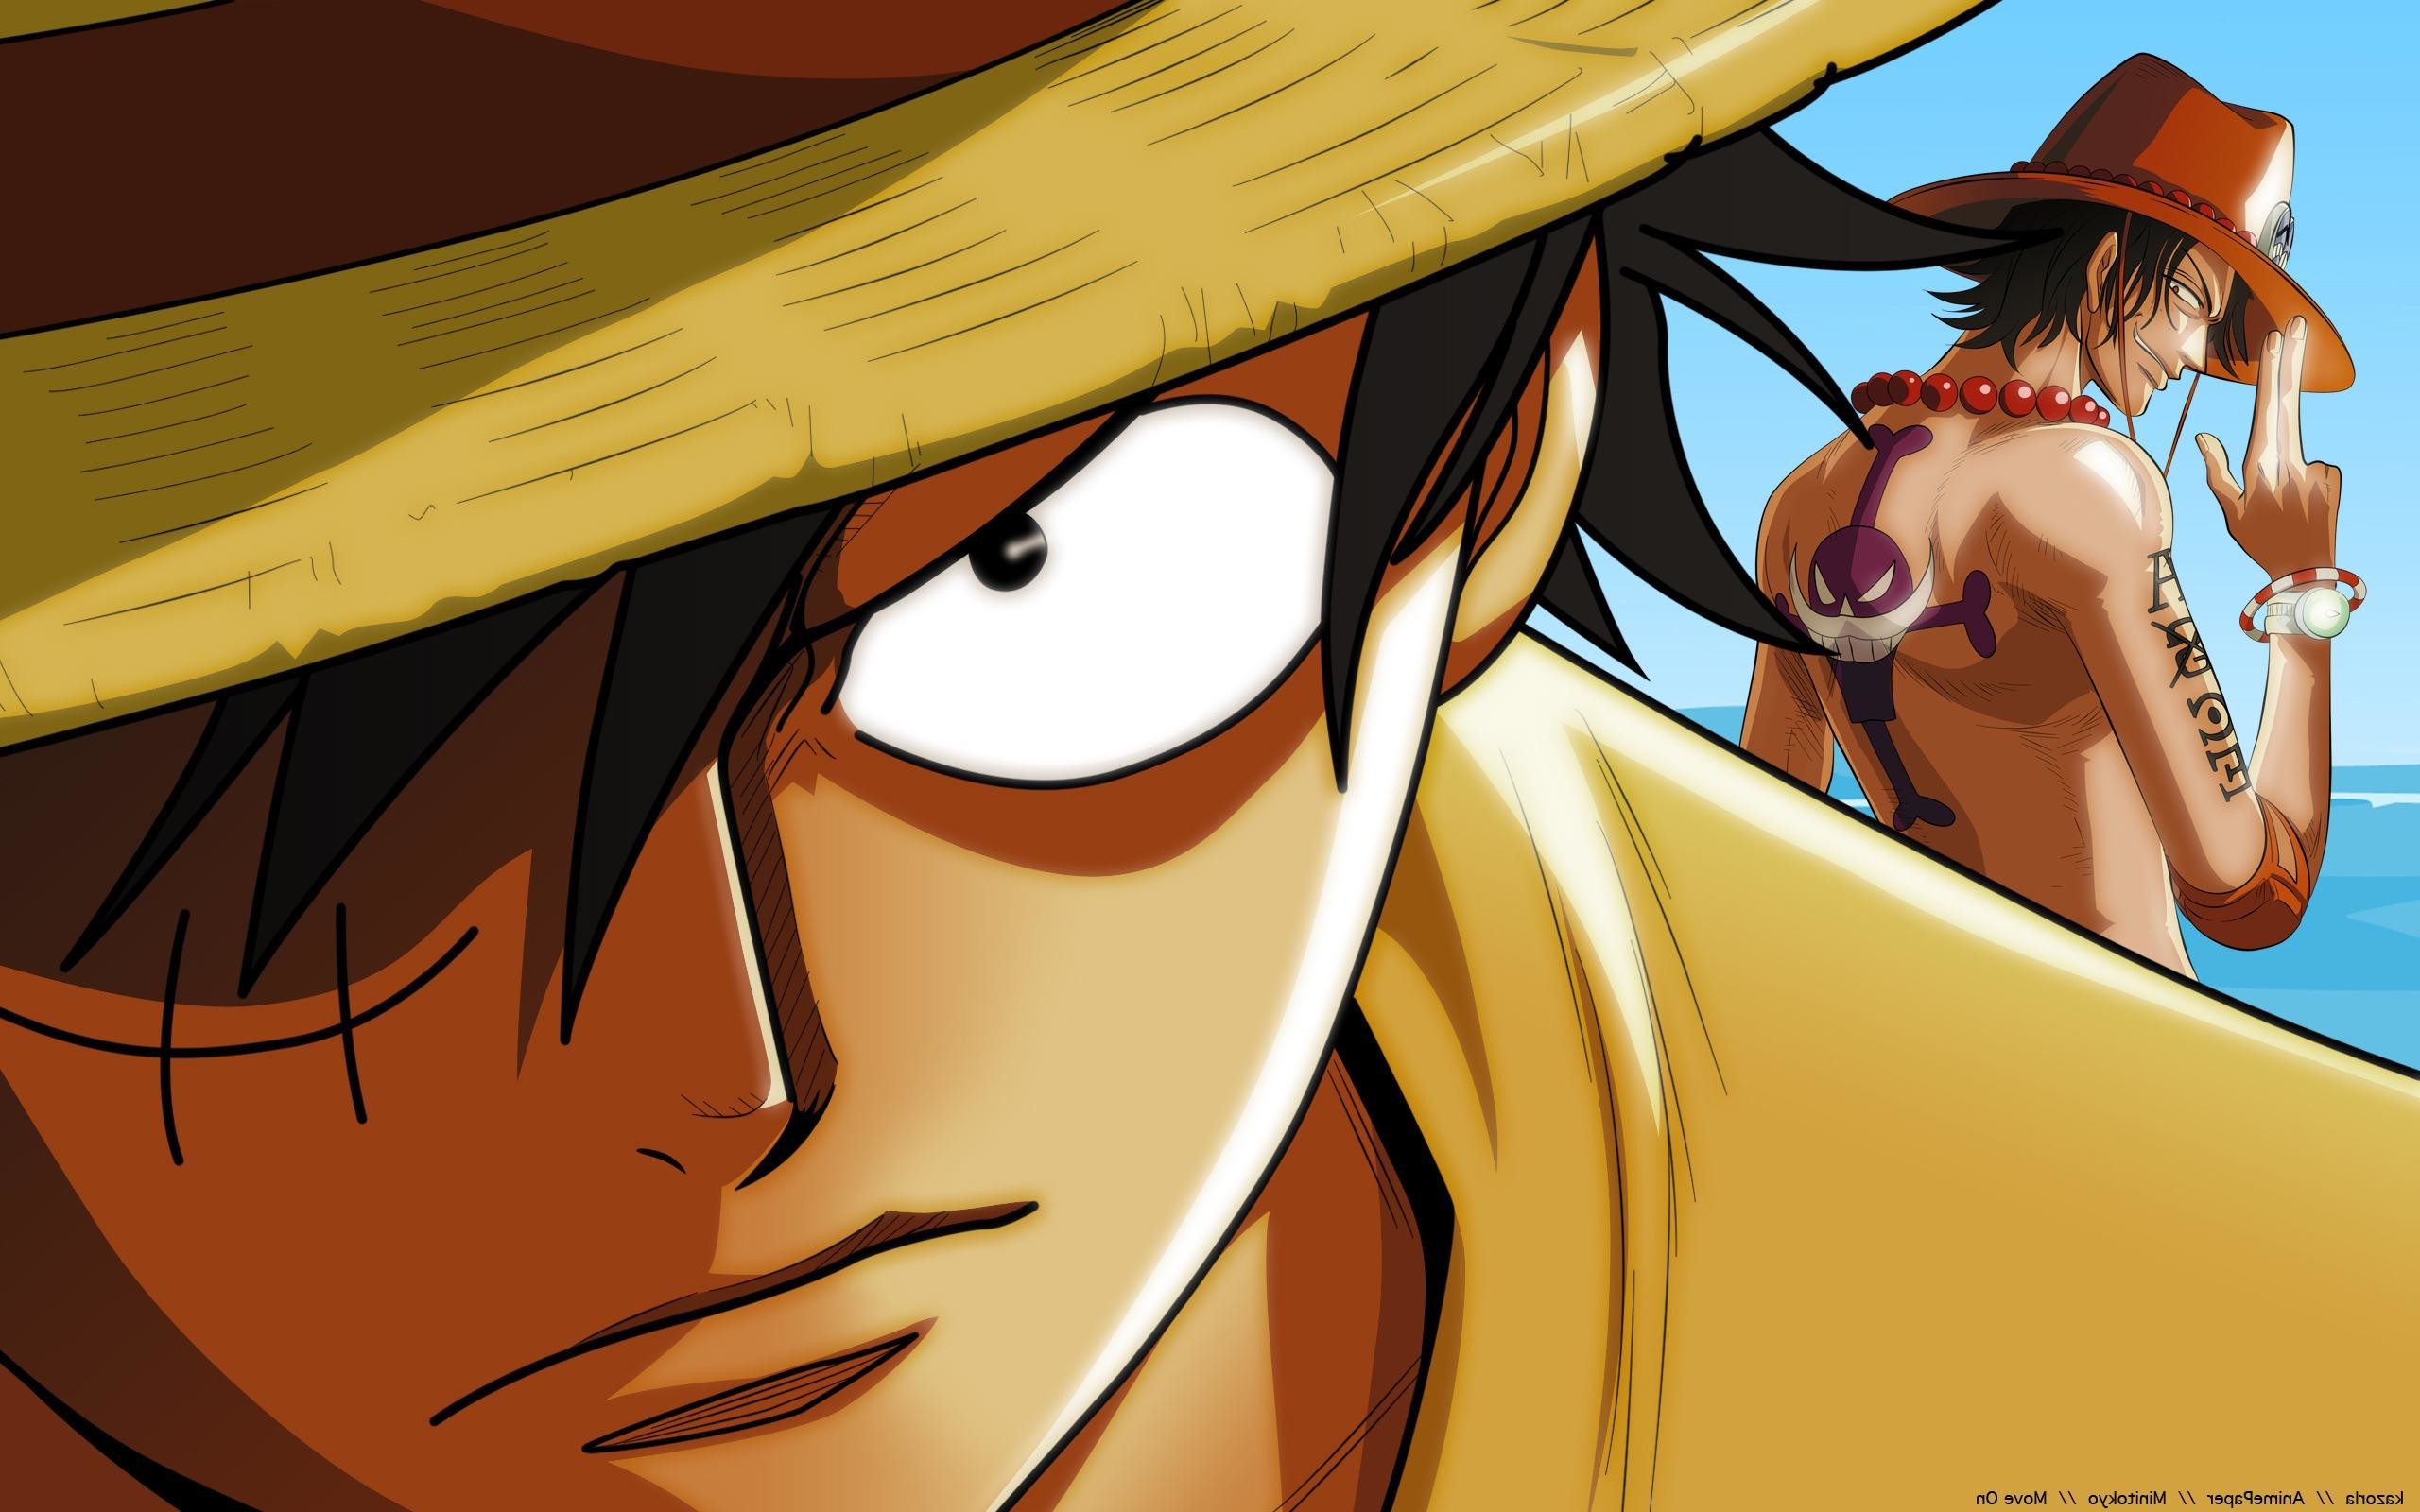 HD desktop wallpaper: Anime, Portgas D Ace, One Piece, Monkey D Luffy,  Straw Hat, Sabo (One Piece) download free picture #357460